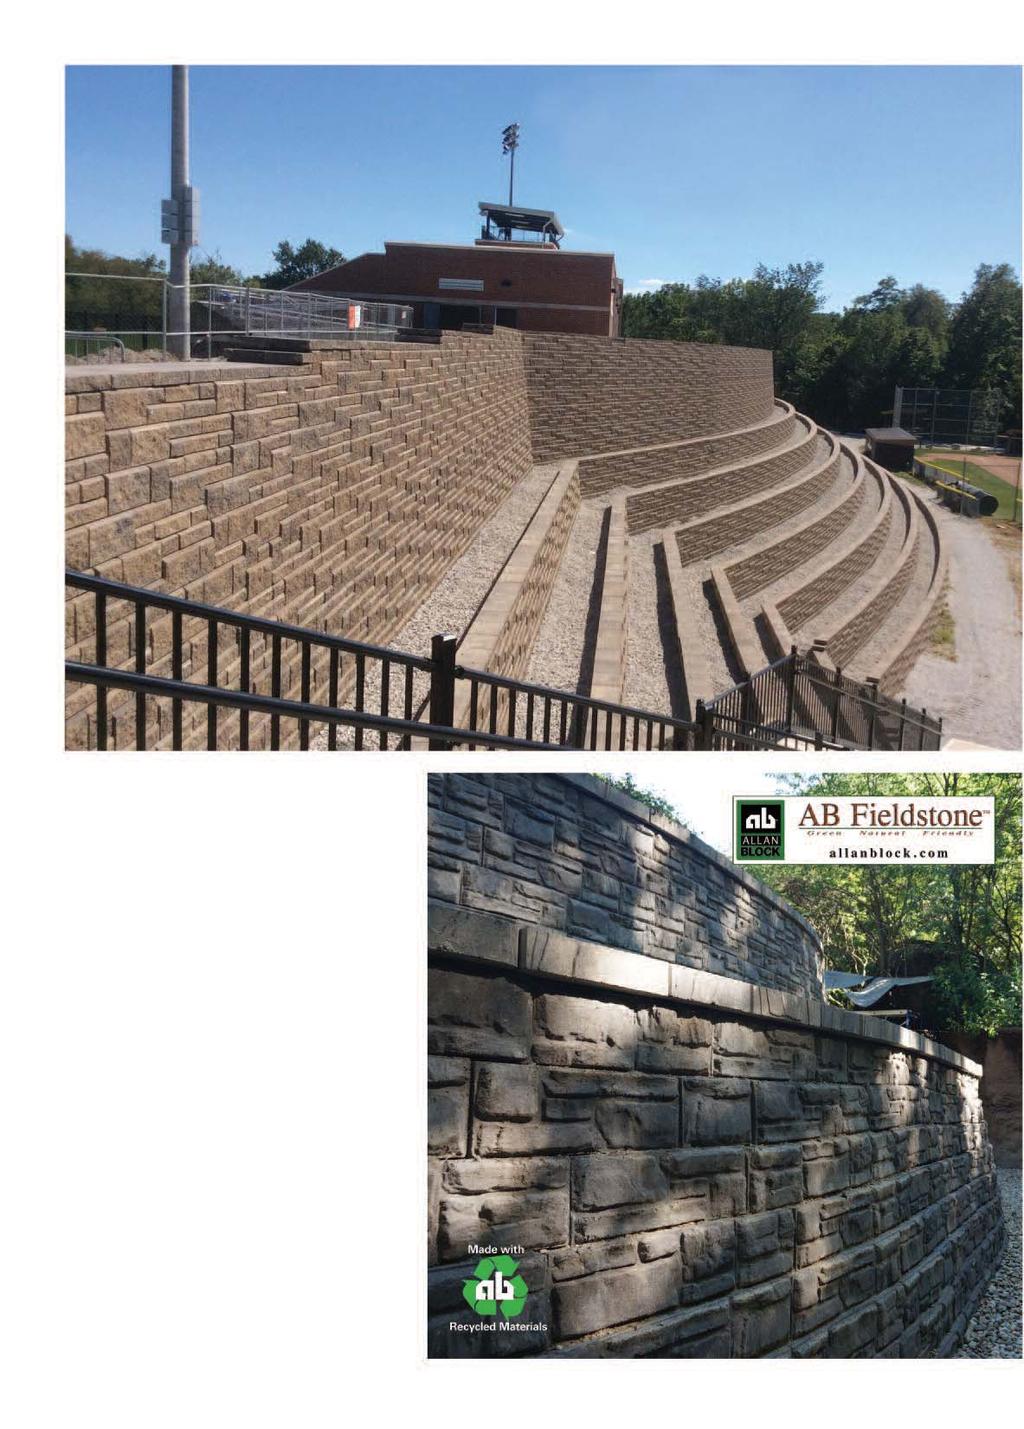 About Us Allan Block is a leading provider of patented retaining wall systems for largescale commercial, industrial, roadway and residential projects.